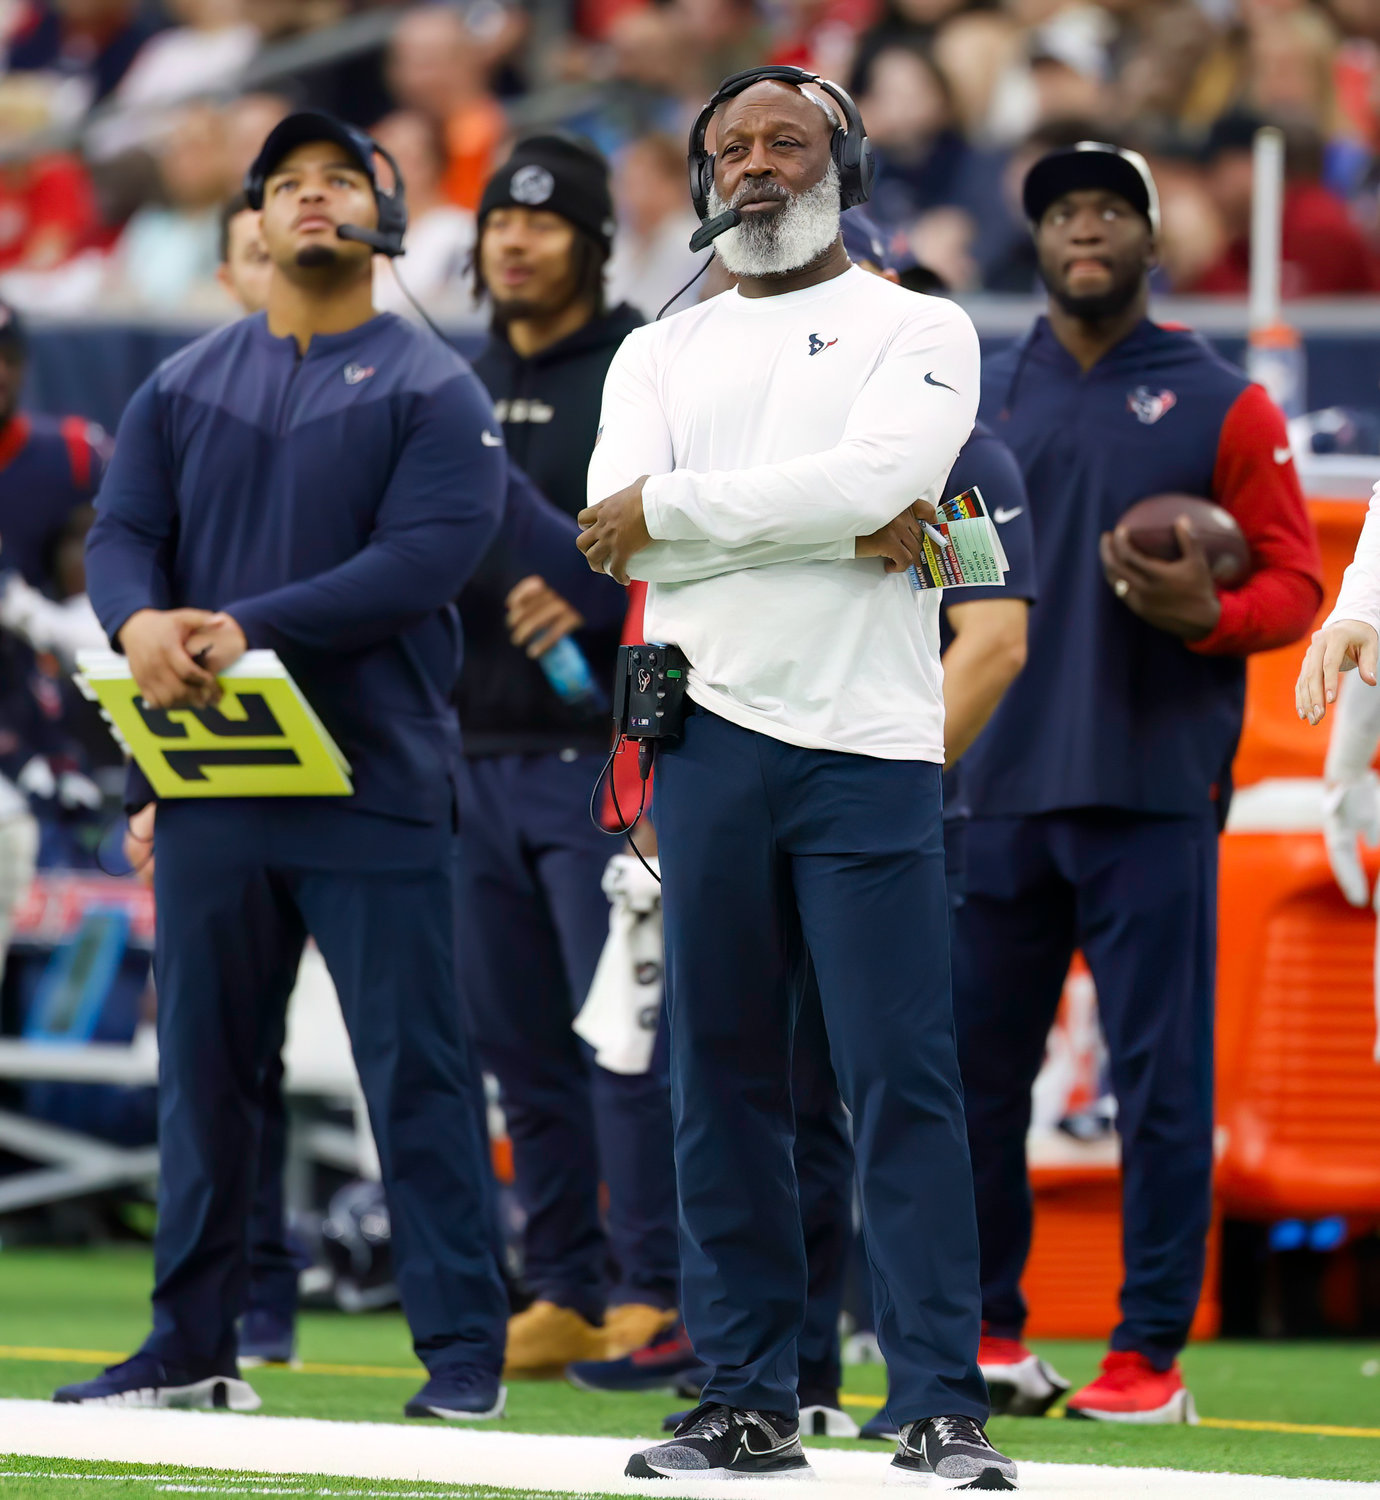 Texans head coach Lovie Smith during an NFL game between the Houston Texans and the Jacksonville Jaguars on Jan. 1, 2023 in Houston. The Jaguars won, 31-3.